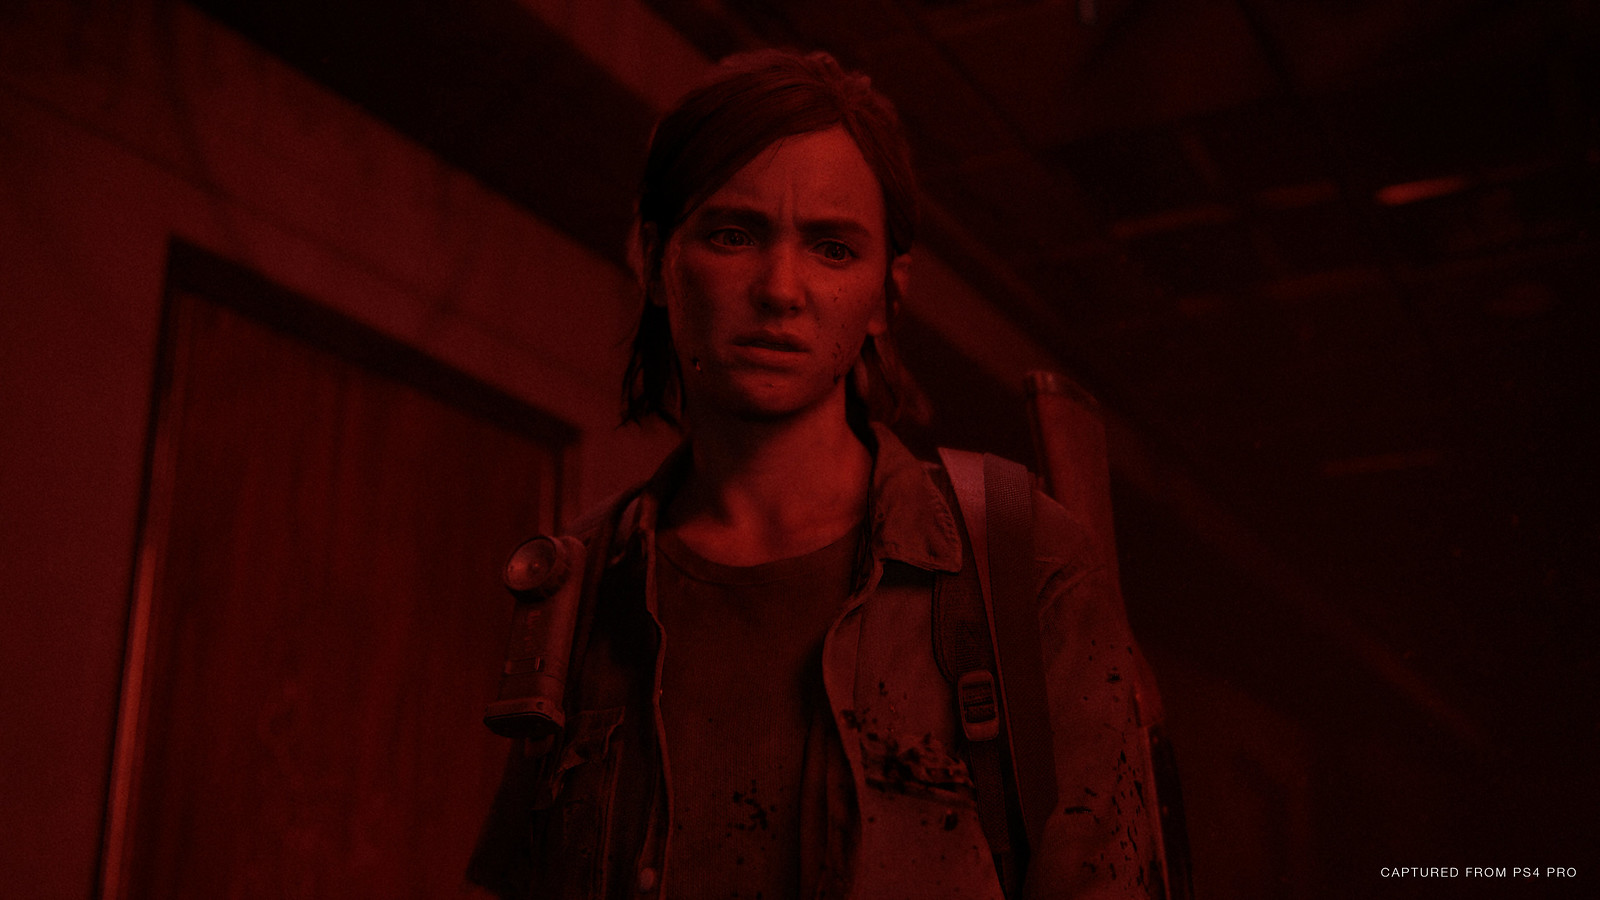 The Last of Us Part II on PS4